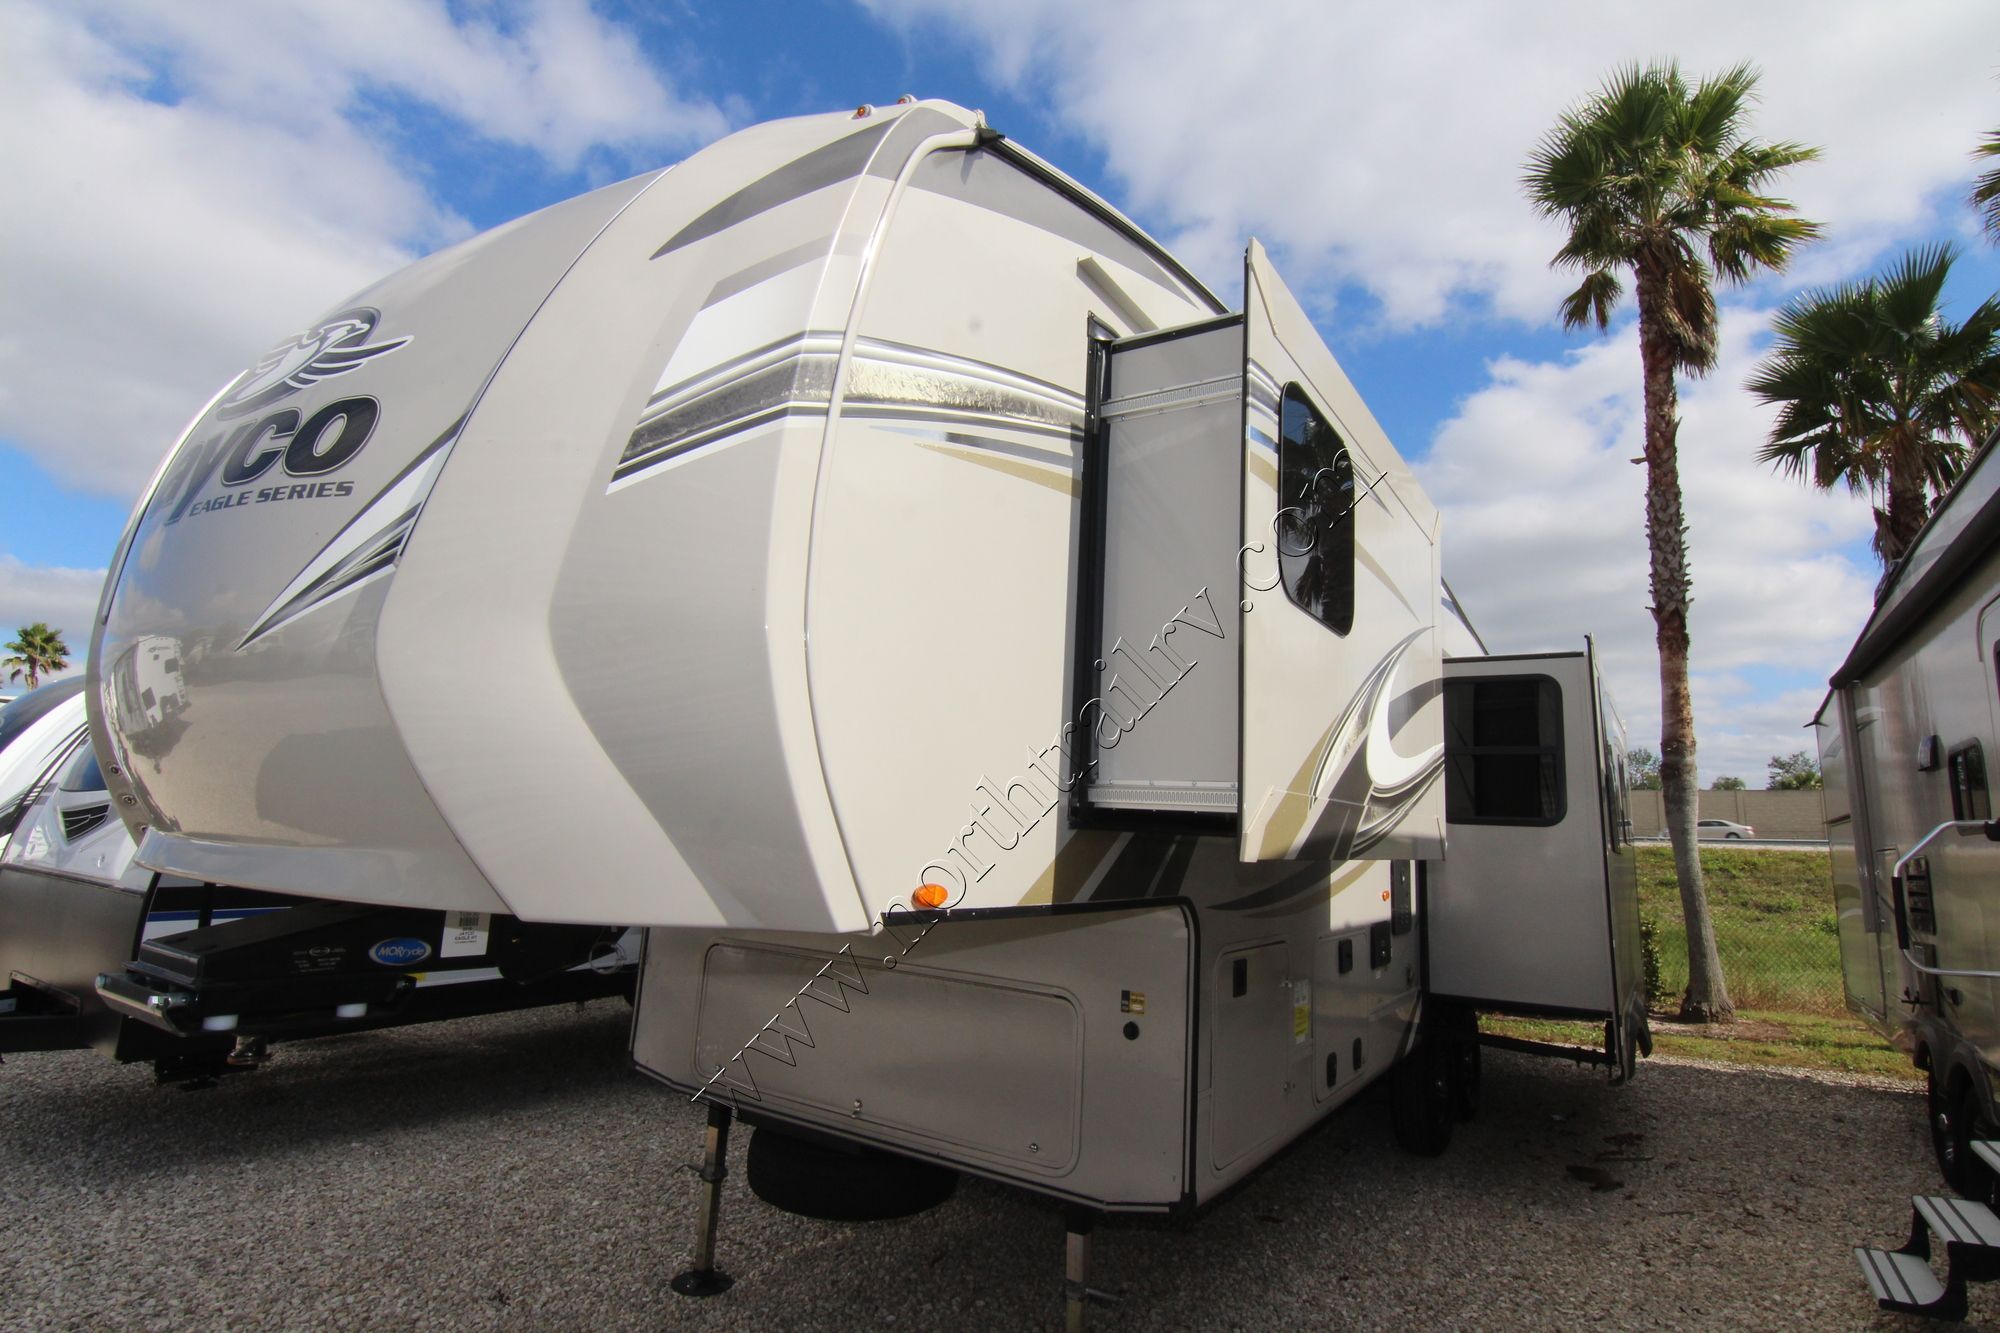 smart converter on 2018 jayco 5th wheels 28.5rsts